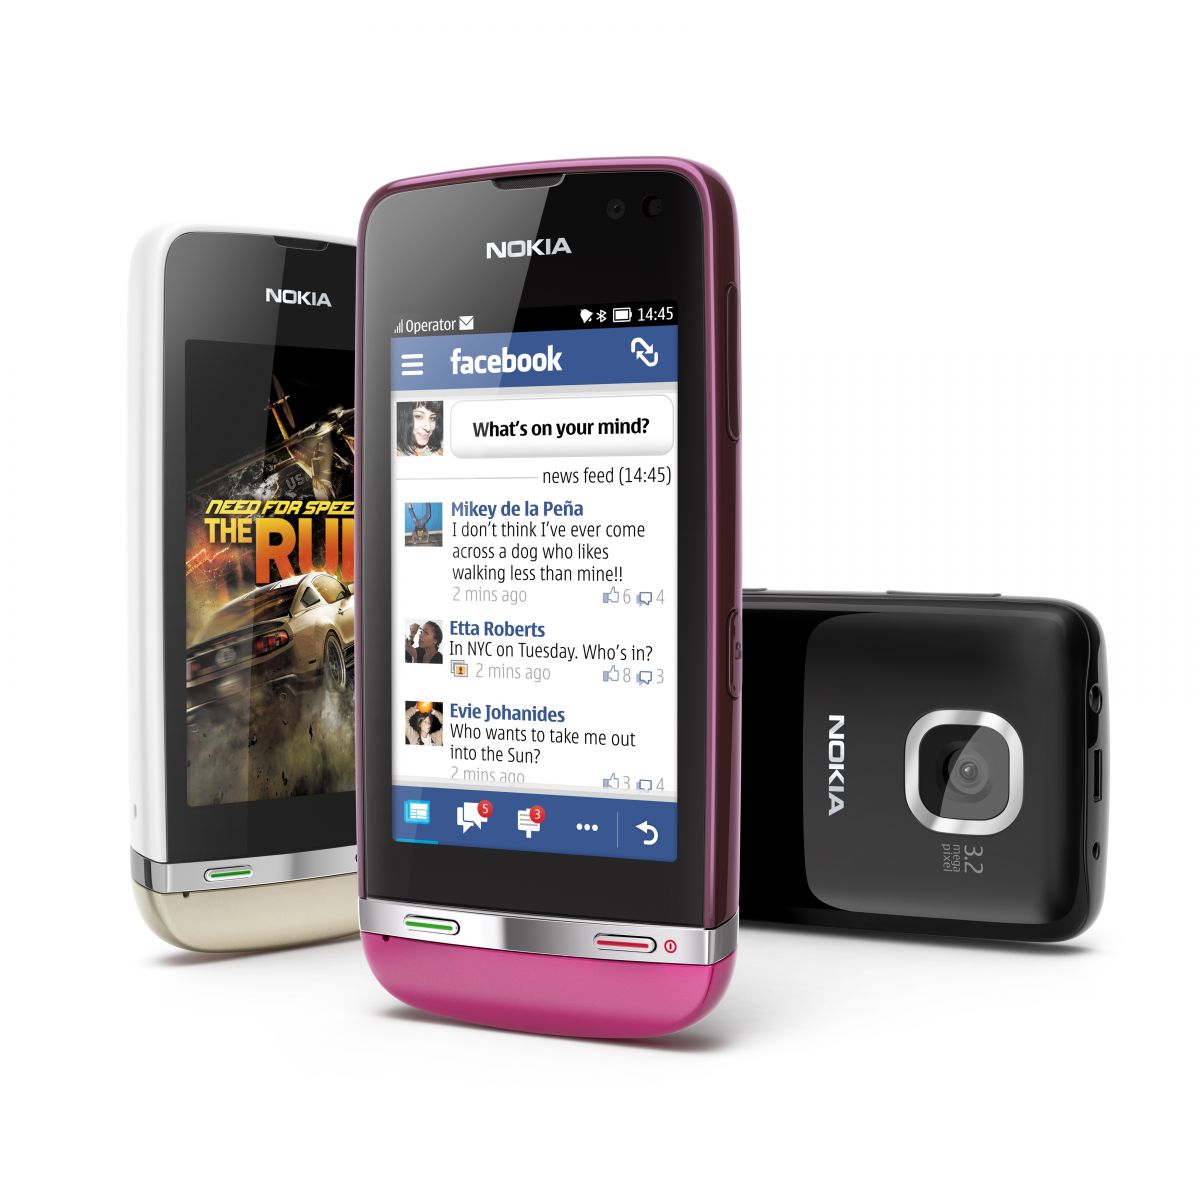 Nokia Asha 311 now available in Philippines